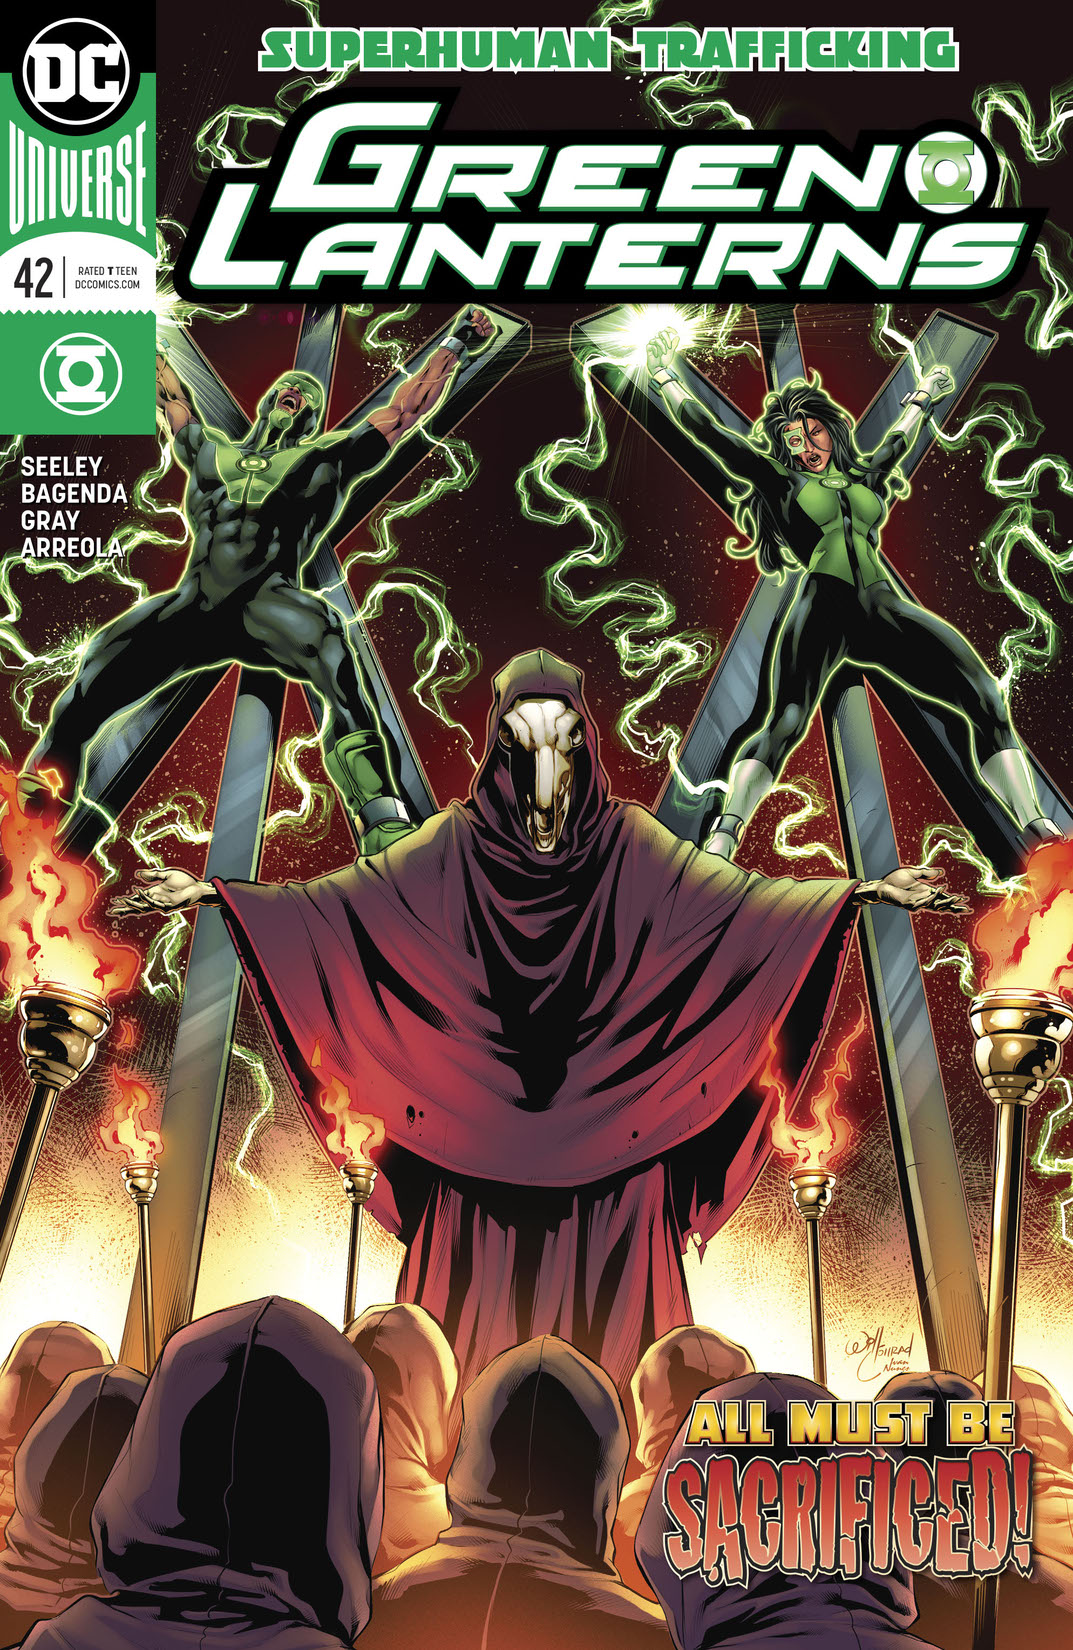 Green Lanterns #42 preview images